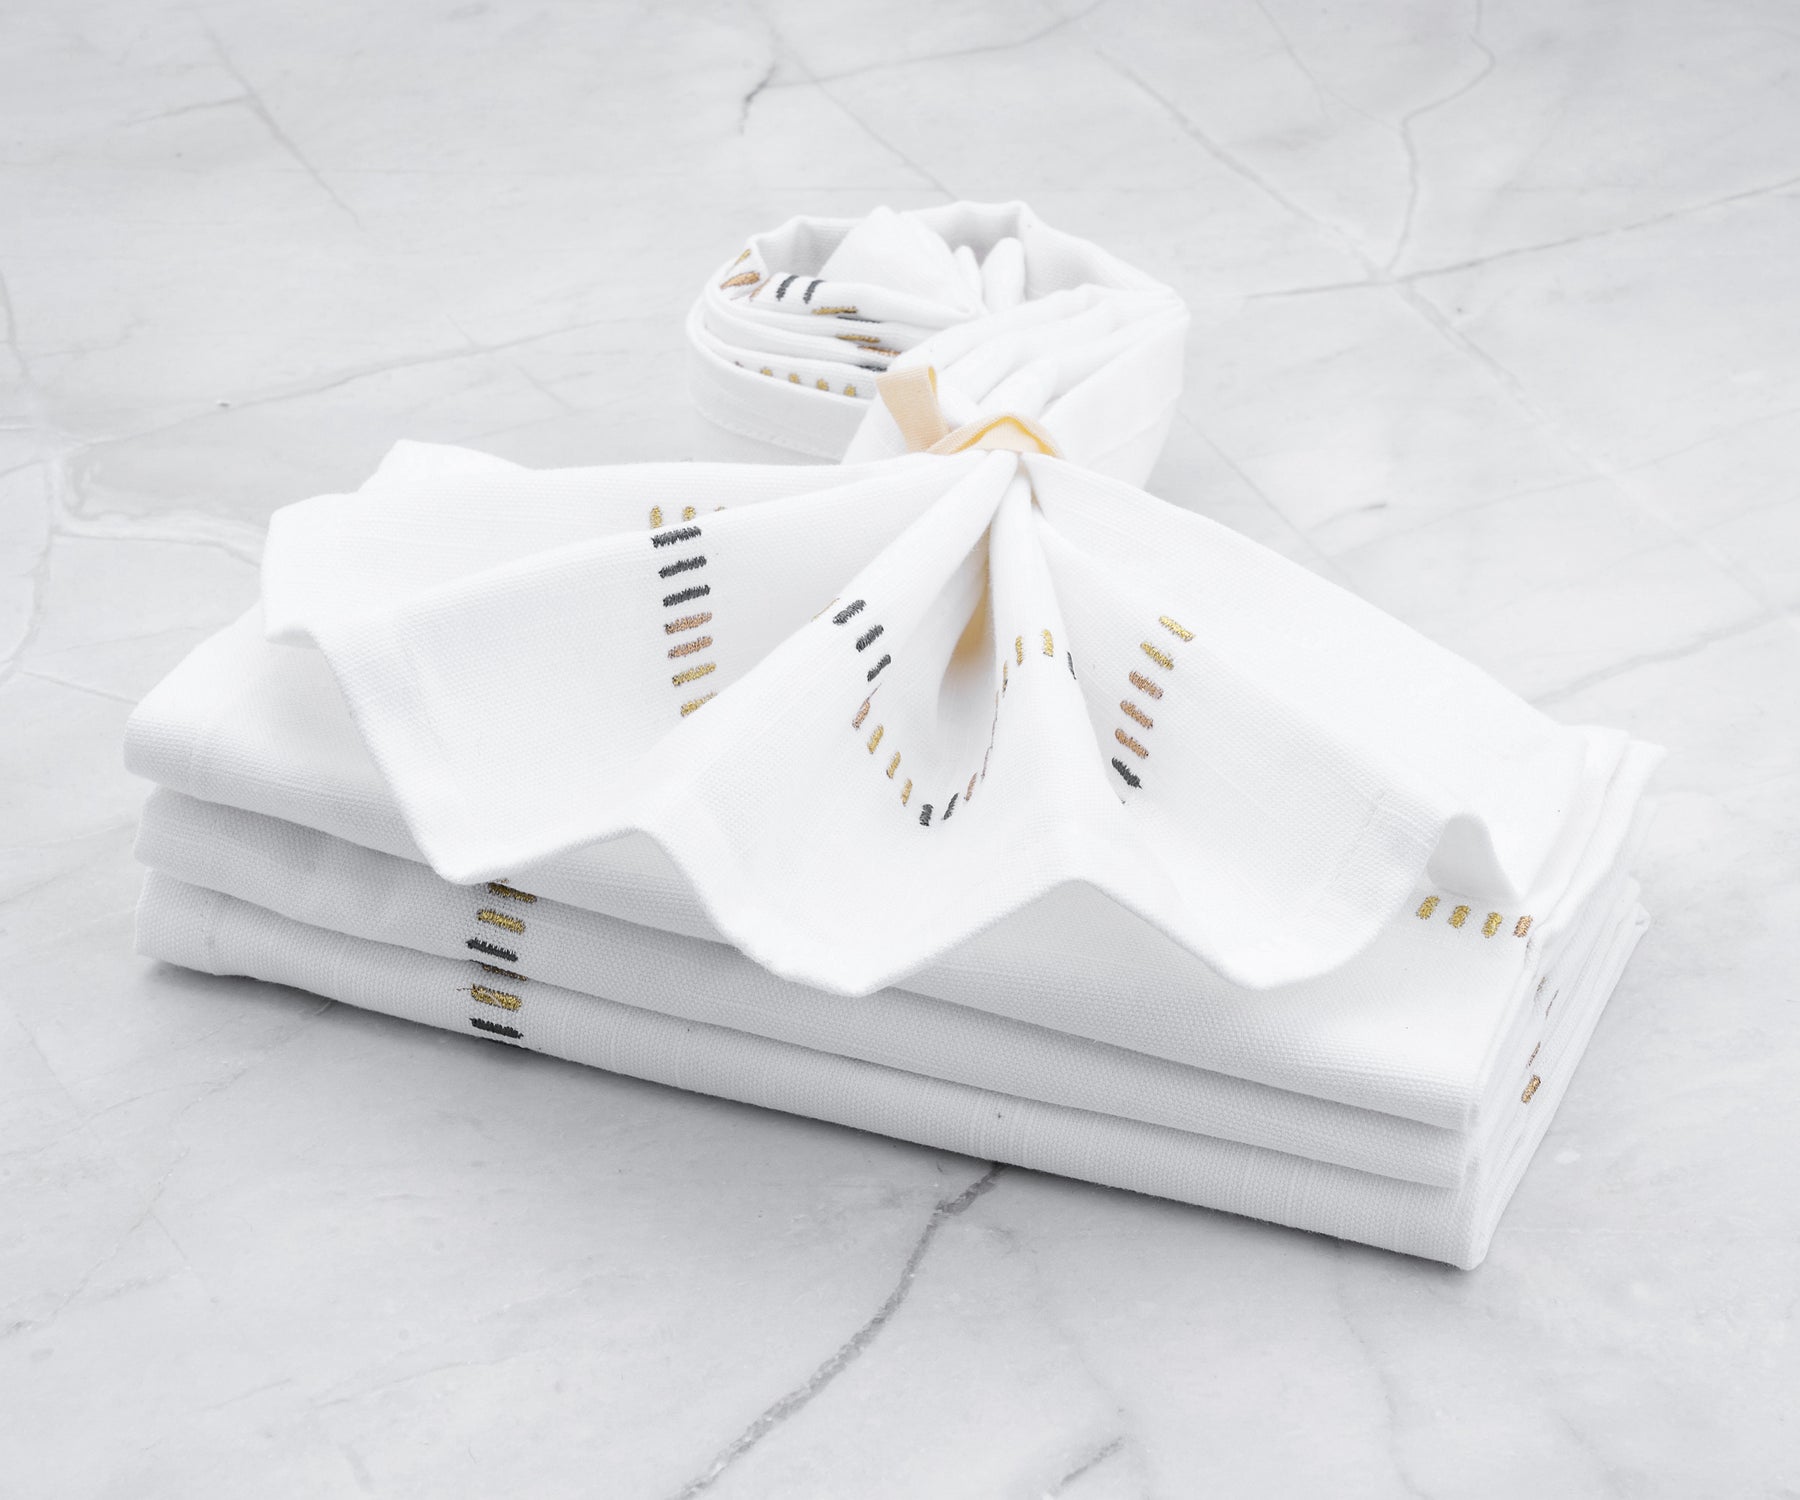 Stylish and practical table napkins for various occasions.